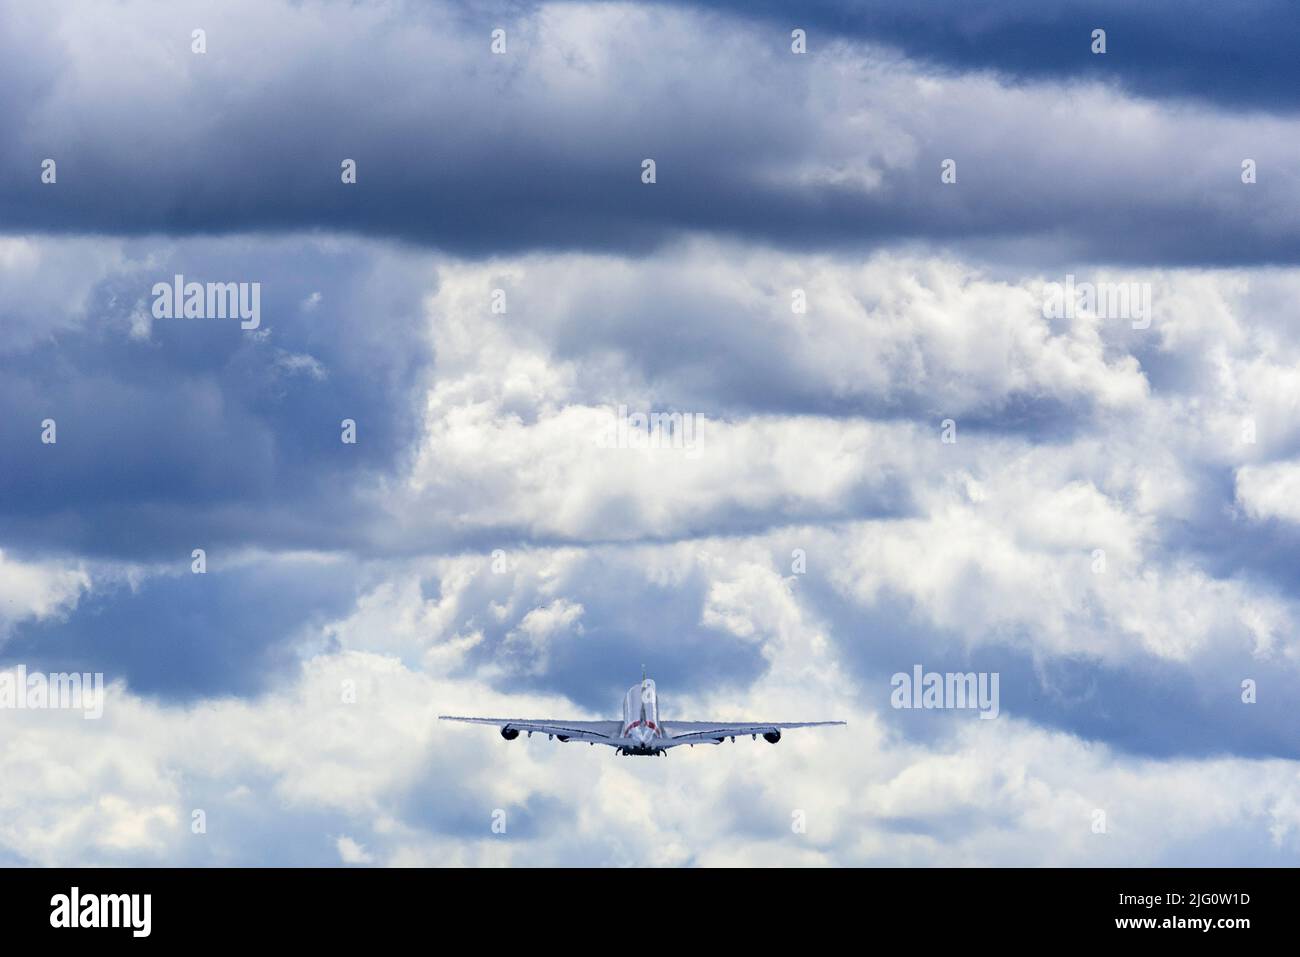 Emirates A380-800 airliner at manchester airport. Stock Photo